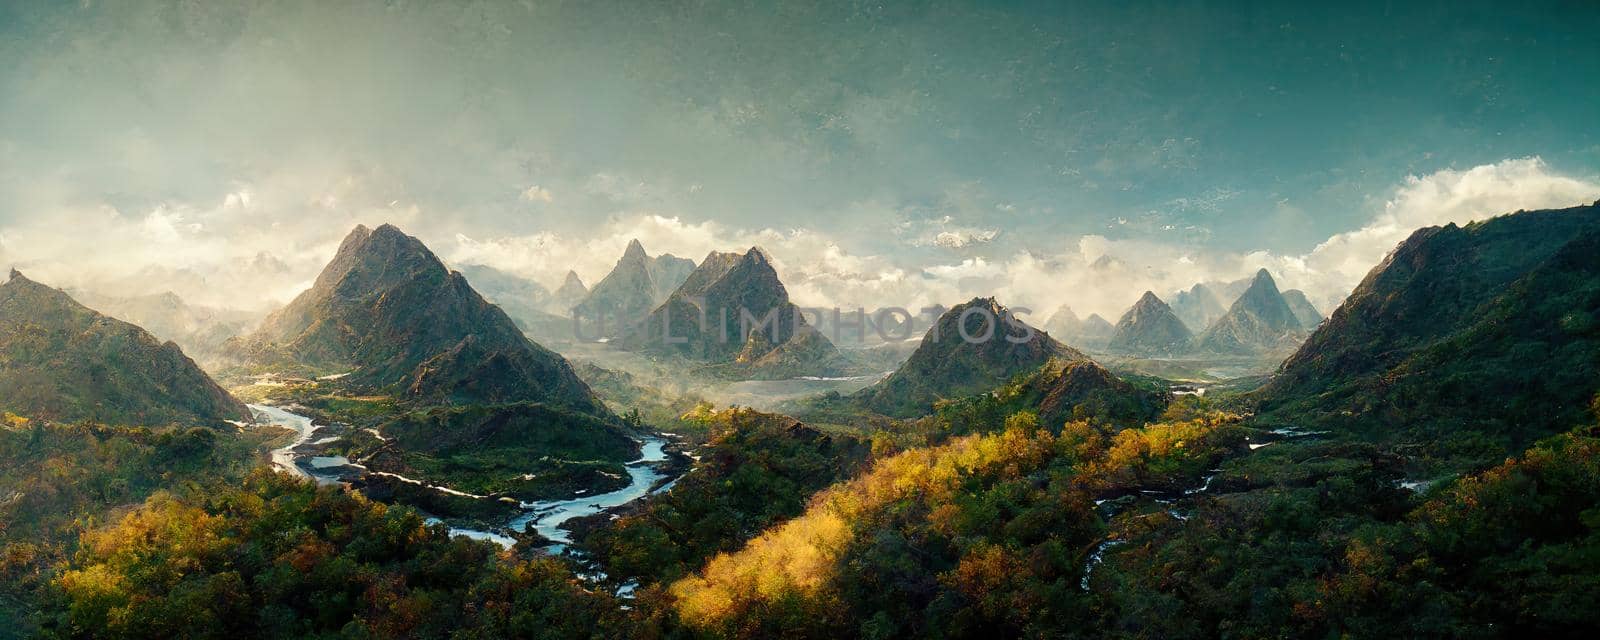 Fantasy Valley With rivers and mountains rising between them by TRMK